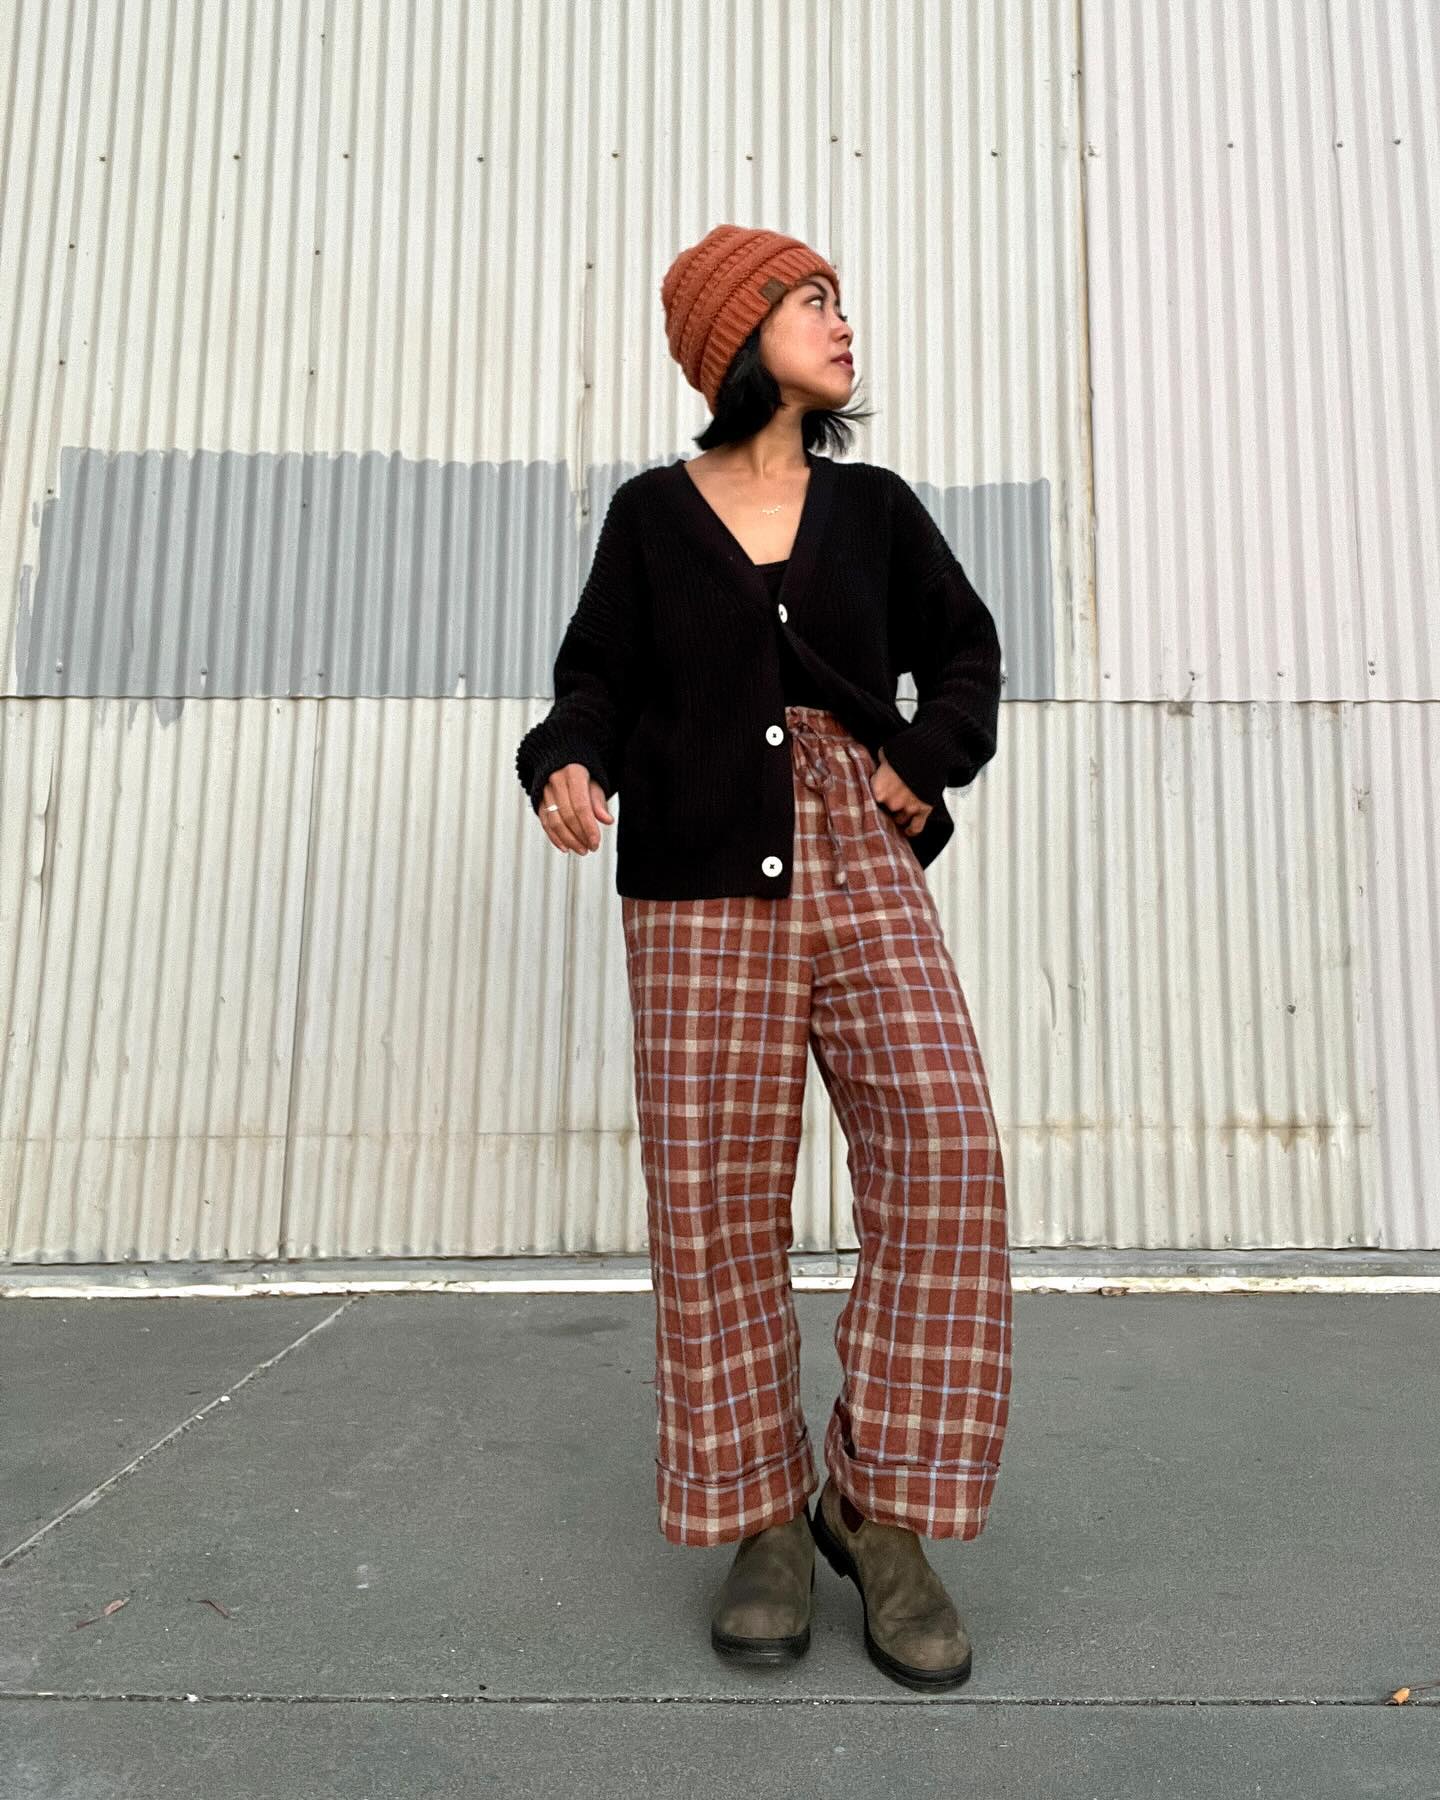 Matching plaid pants with Camisole and Botton down cardigan